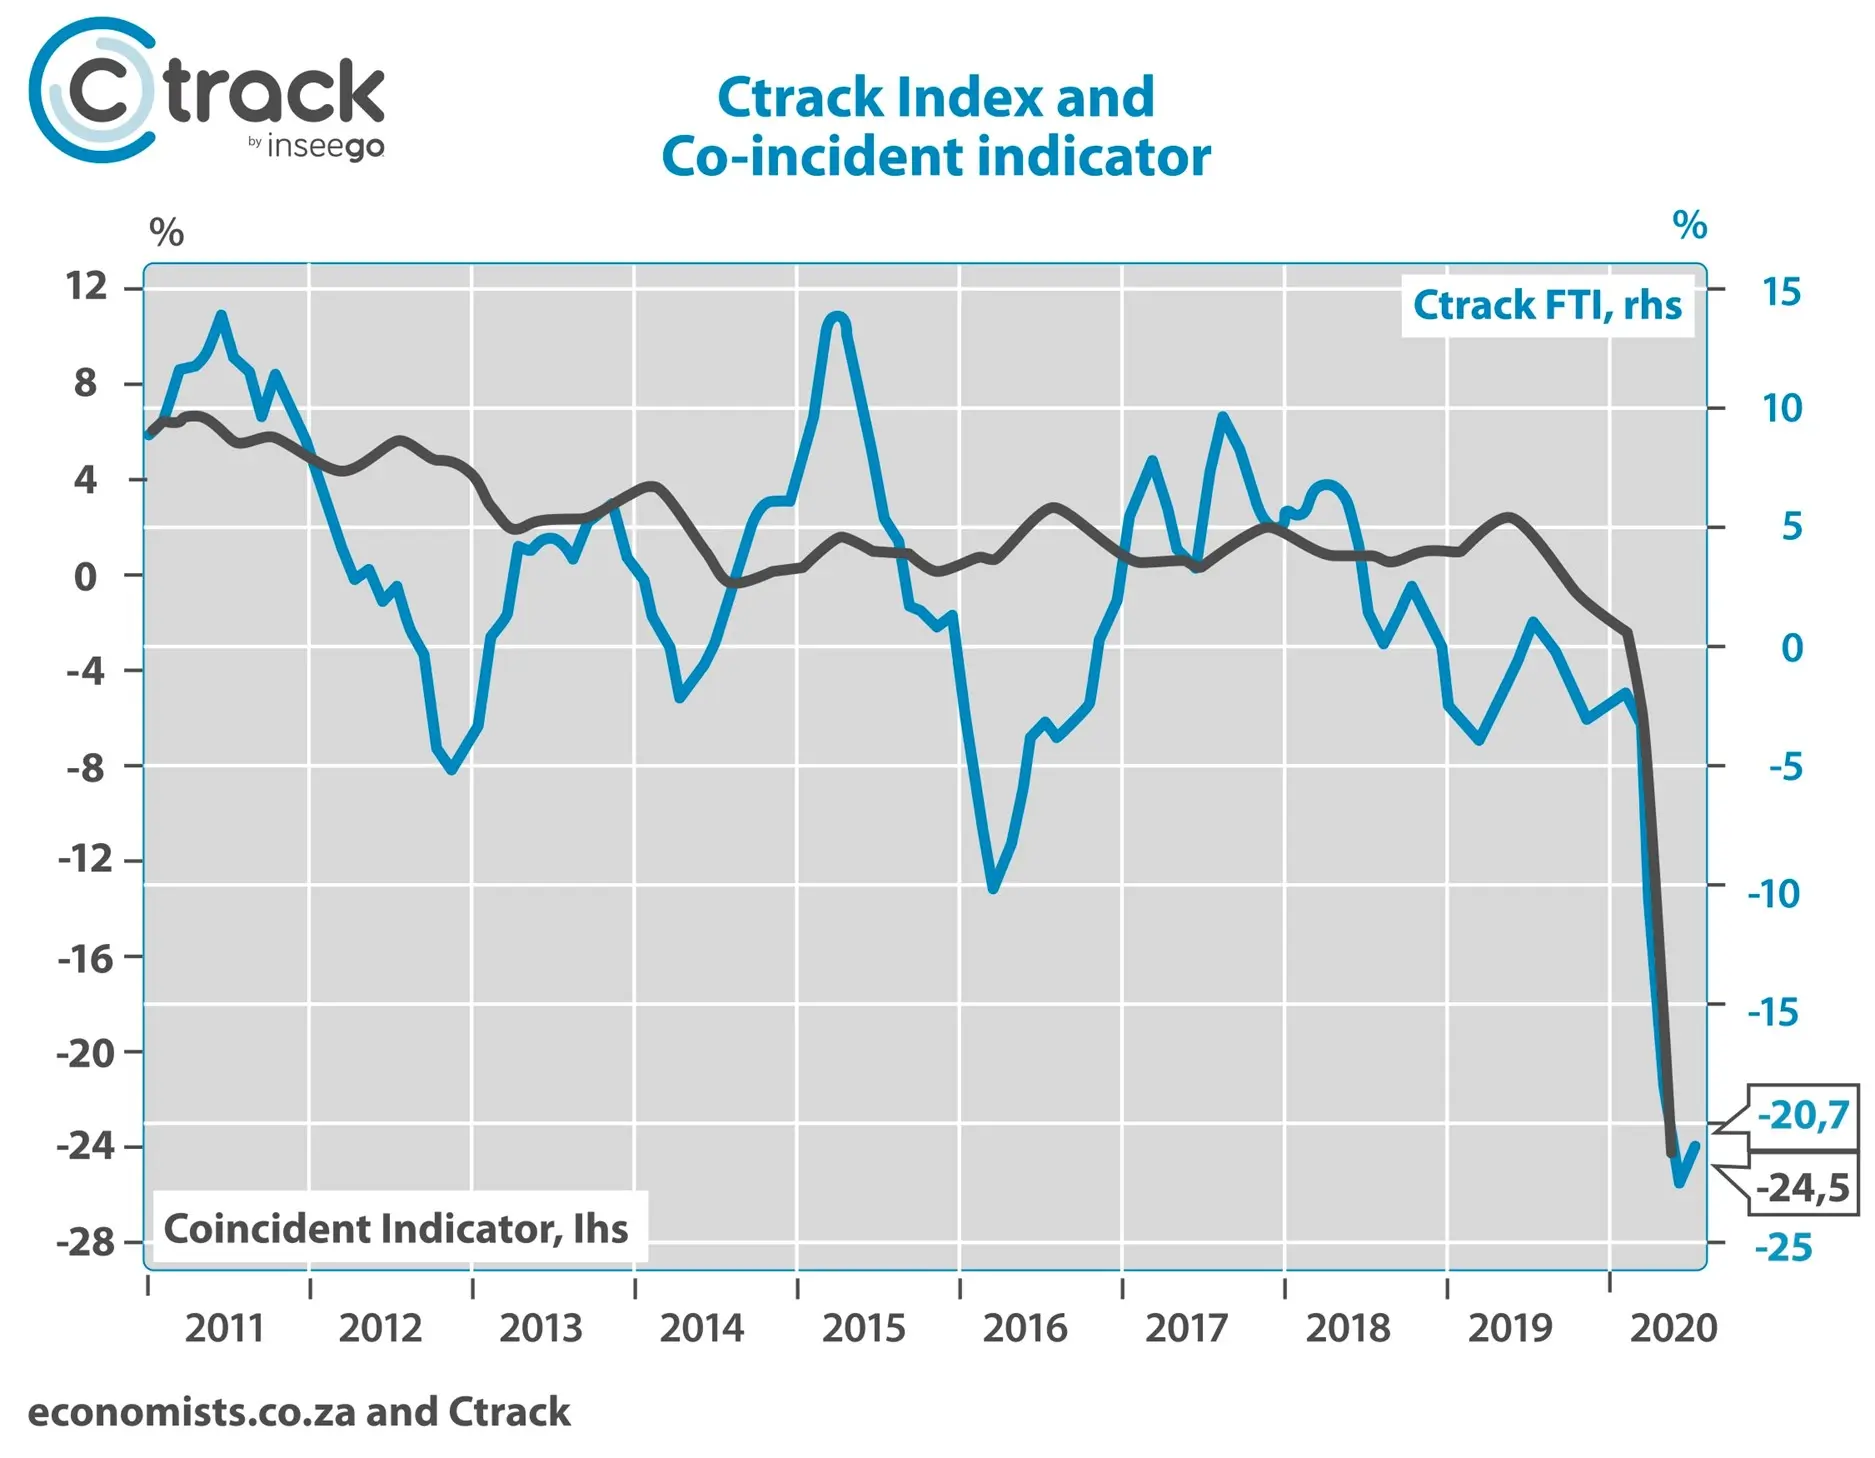 Ctrack-Index-and-Co-indicator-August-2020.